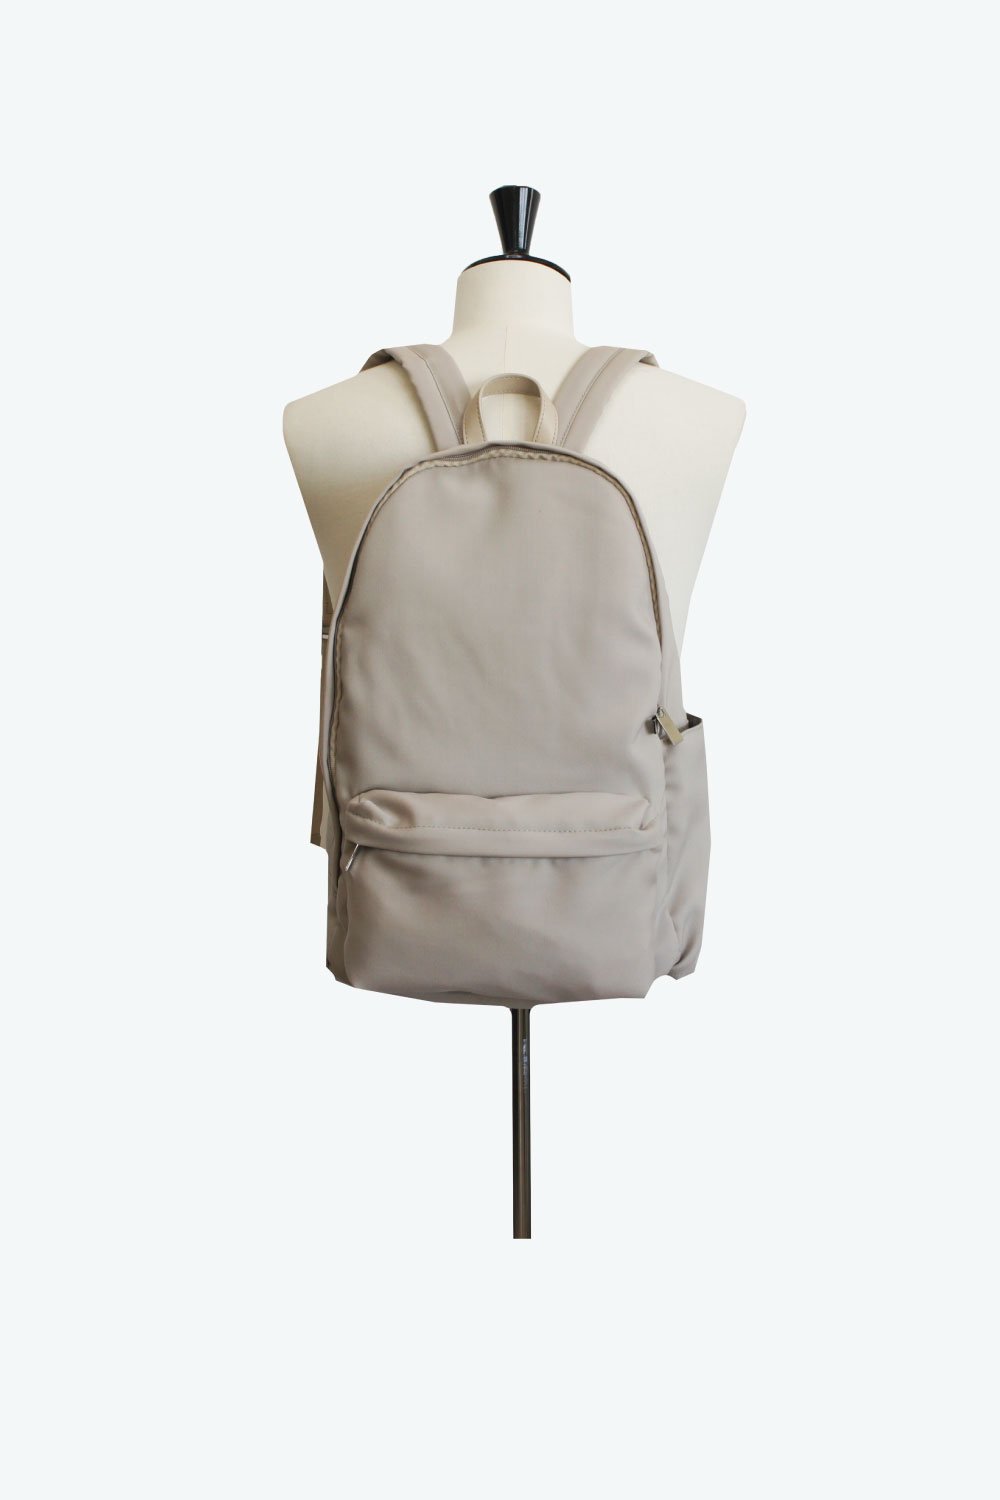 <img class='new_mark_img1' src='https://img.shop-pro.jp/img/new/icons14.gif' style='border:none;display:inline;margin:0px;padding:0px;width:auto;' />HARDWOOL LIGHT BACK PACK _BEIGE